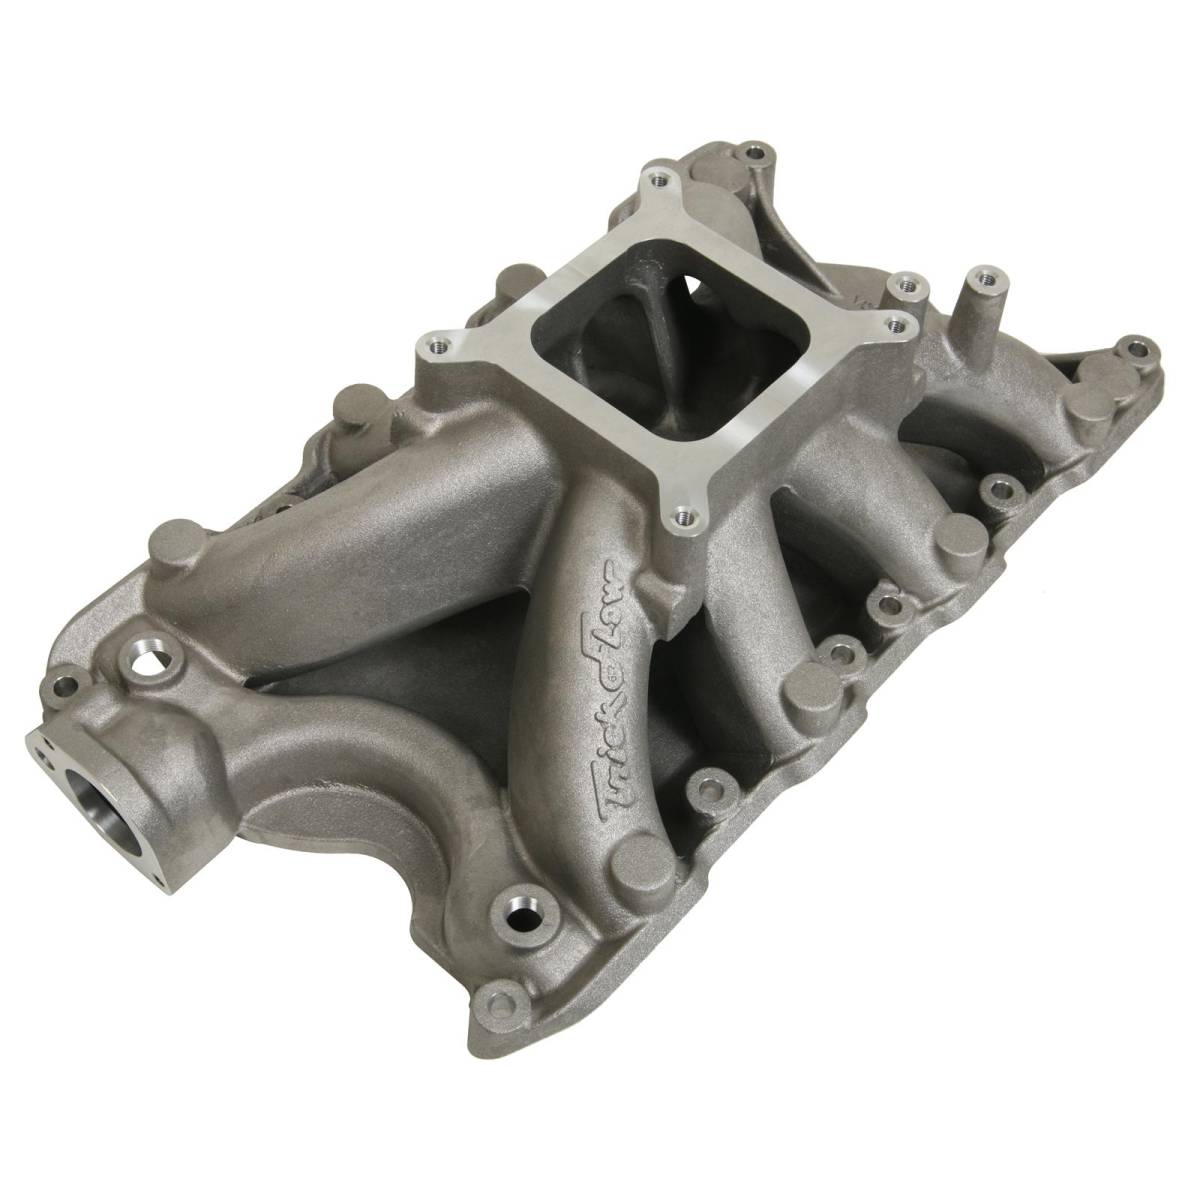 Trickflow - Trick Flow R-Series Intake Manifold for 351W SBF w/ Holley 4150 Style Pattern - Image 1